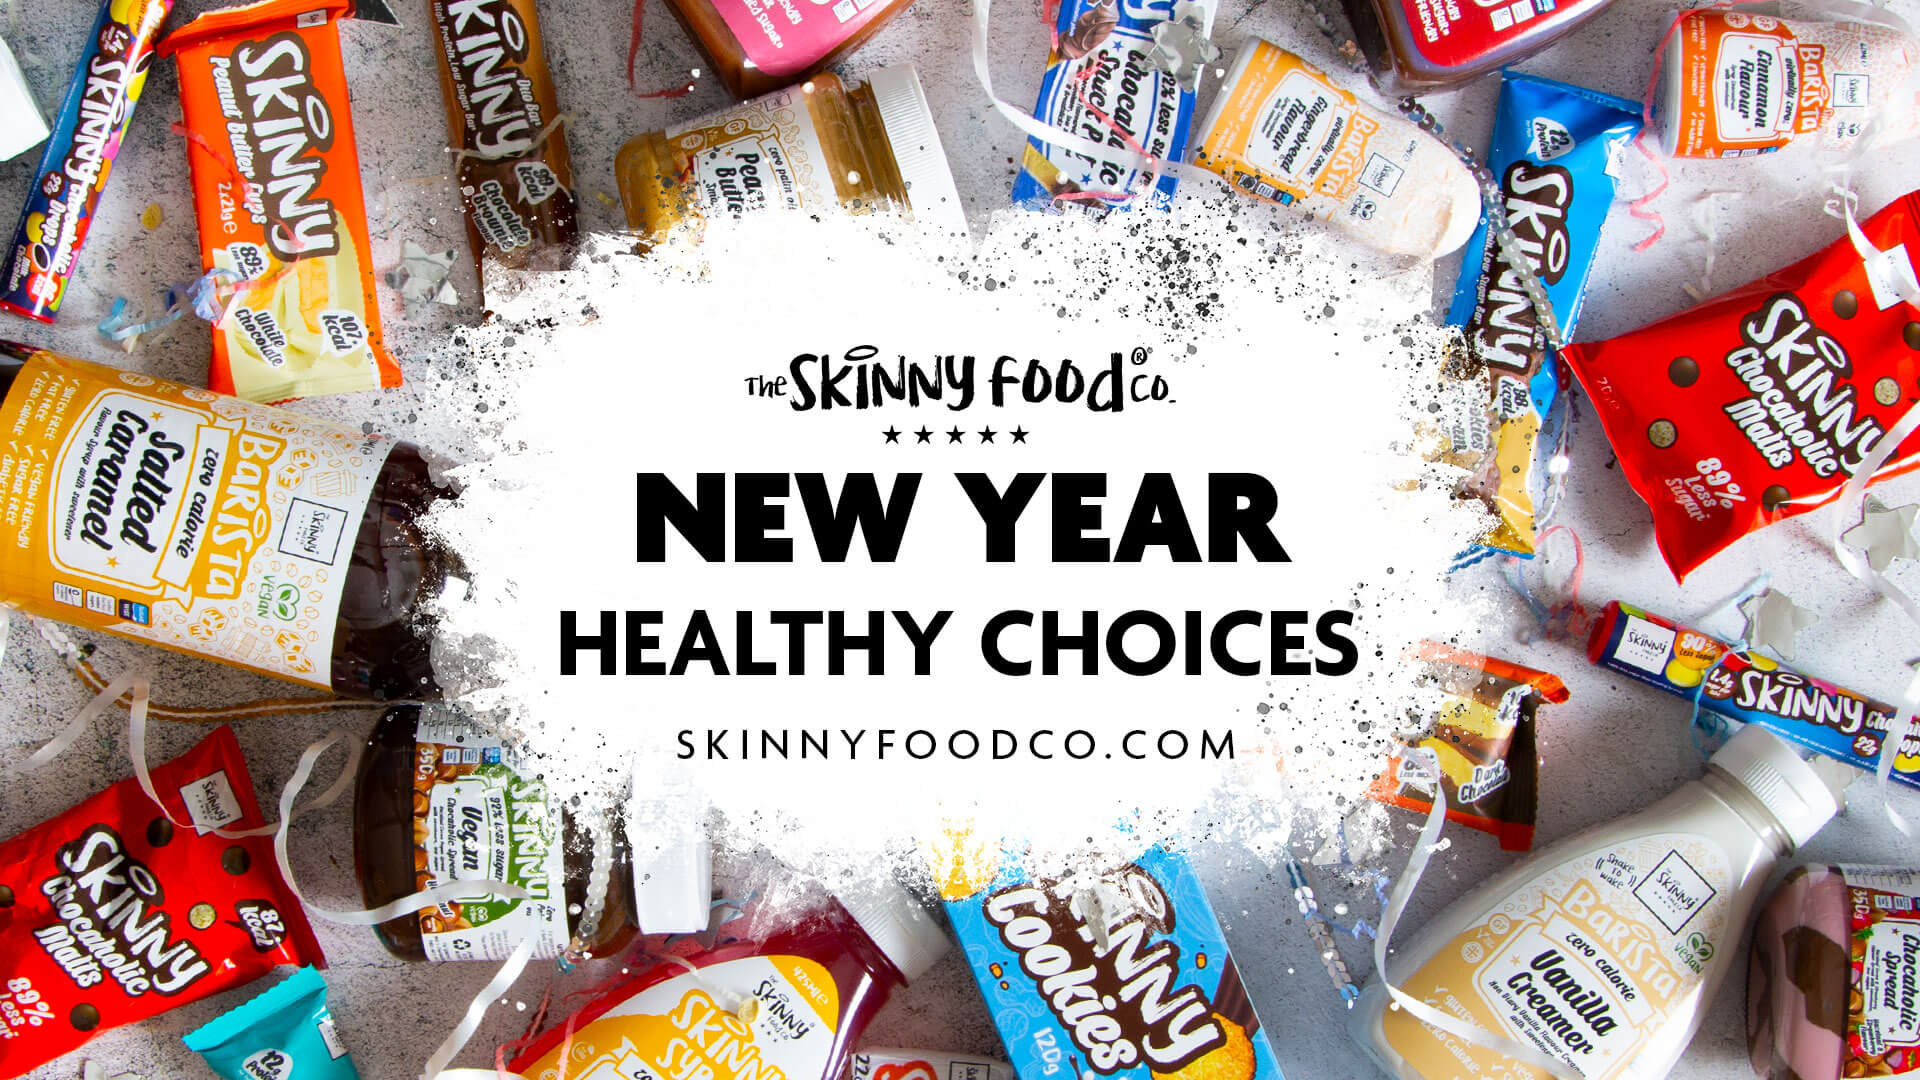 The Skinny Food Co bestselling products